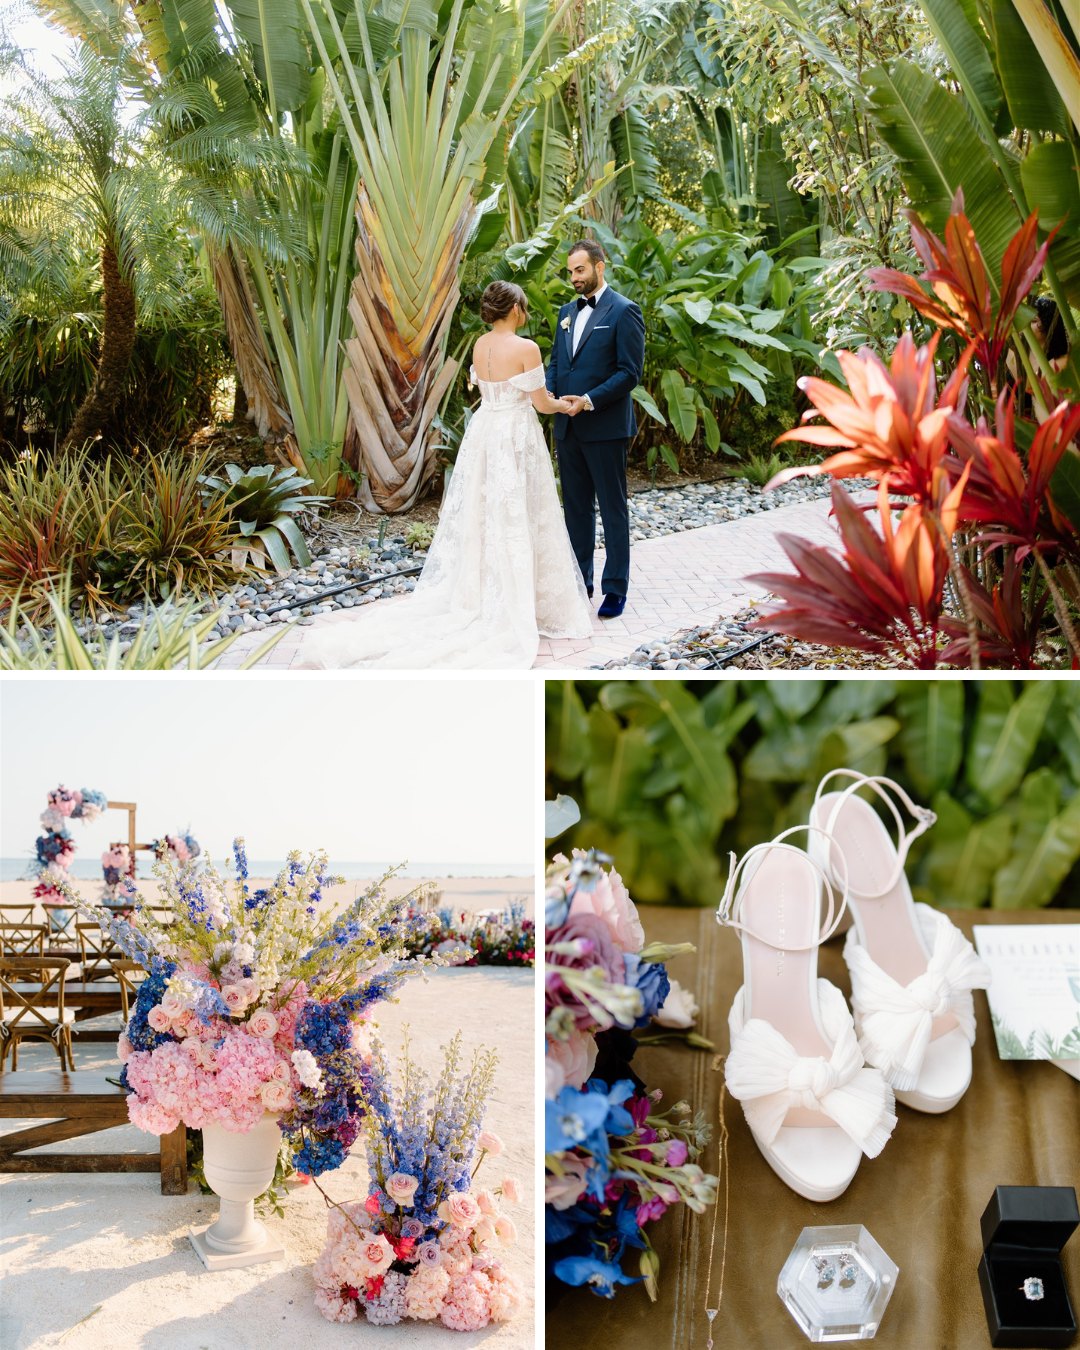 Bride and Groom in tropical beachside ceremony.